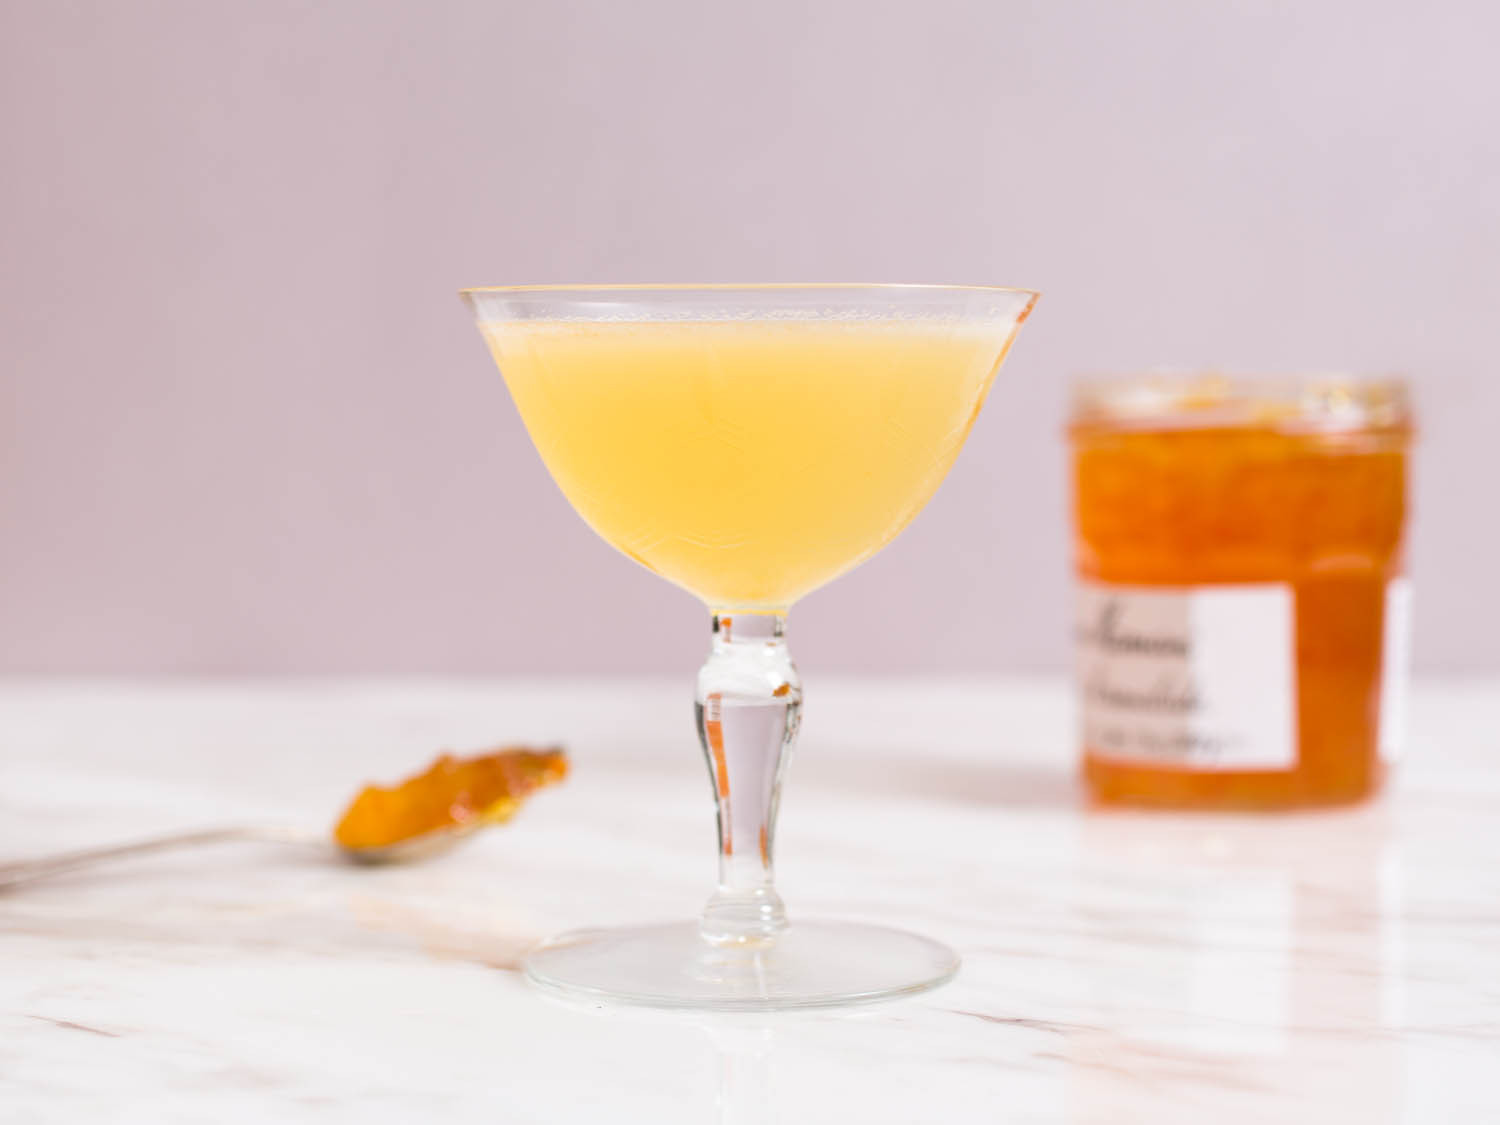 Drinks To Make With Vodka
 Just 1 Bottle 9 Cocktails to Make With Vodka and a Trip